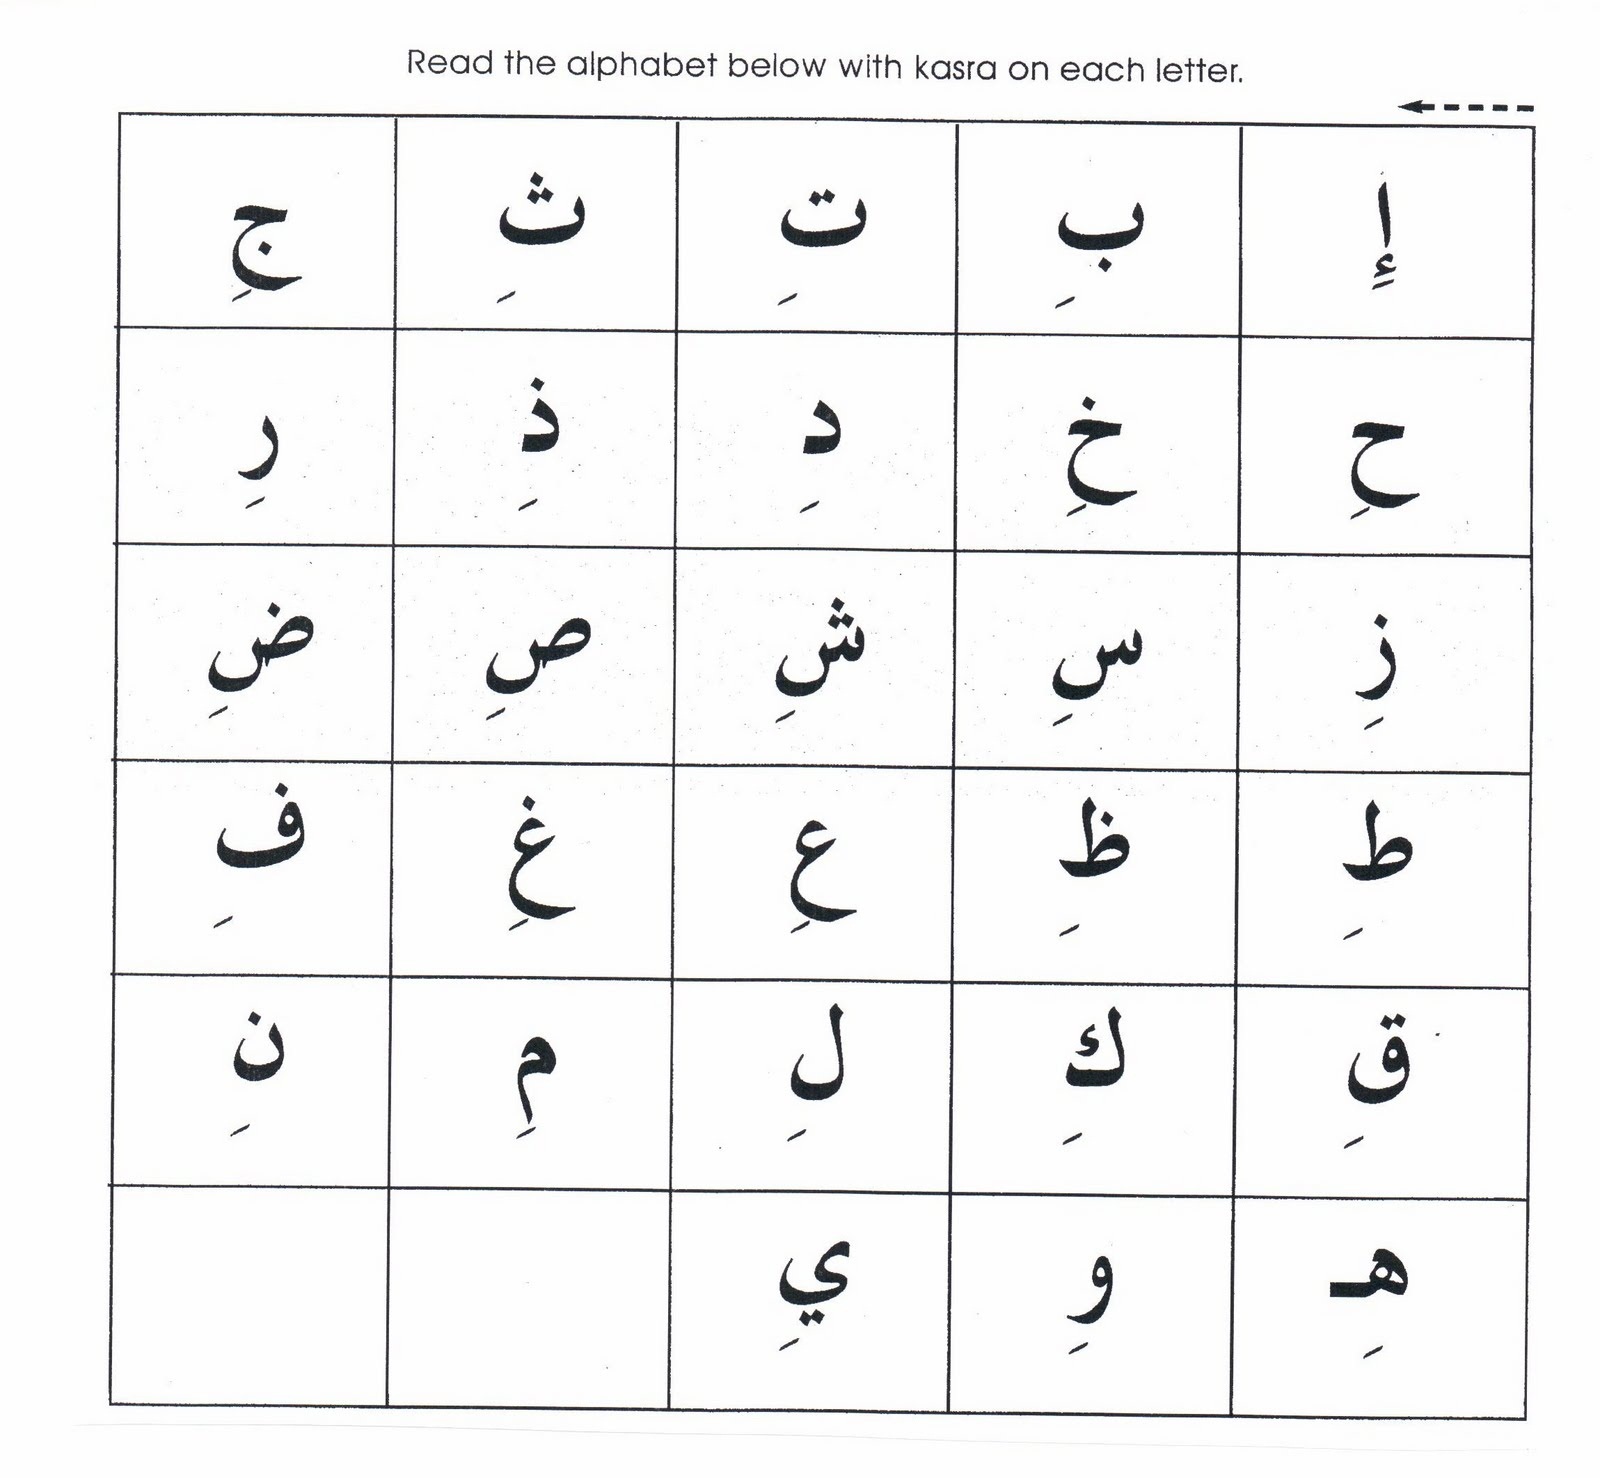 Arabic Alphabet Sheets to Learn Activity Shelter